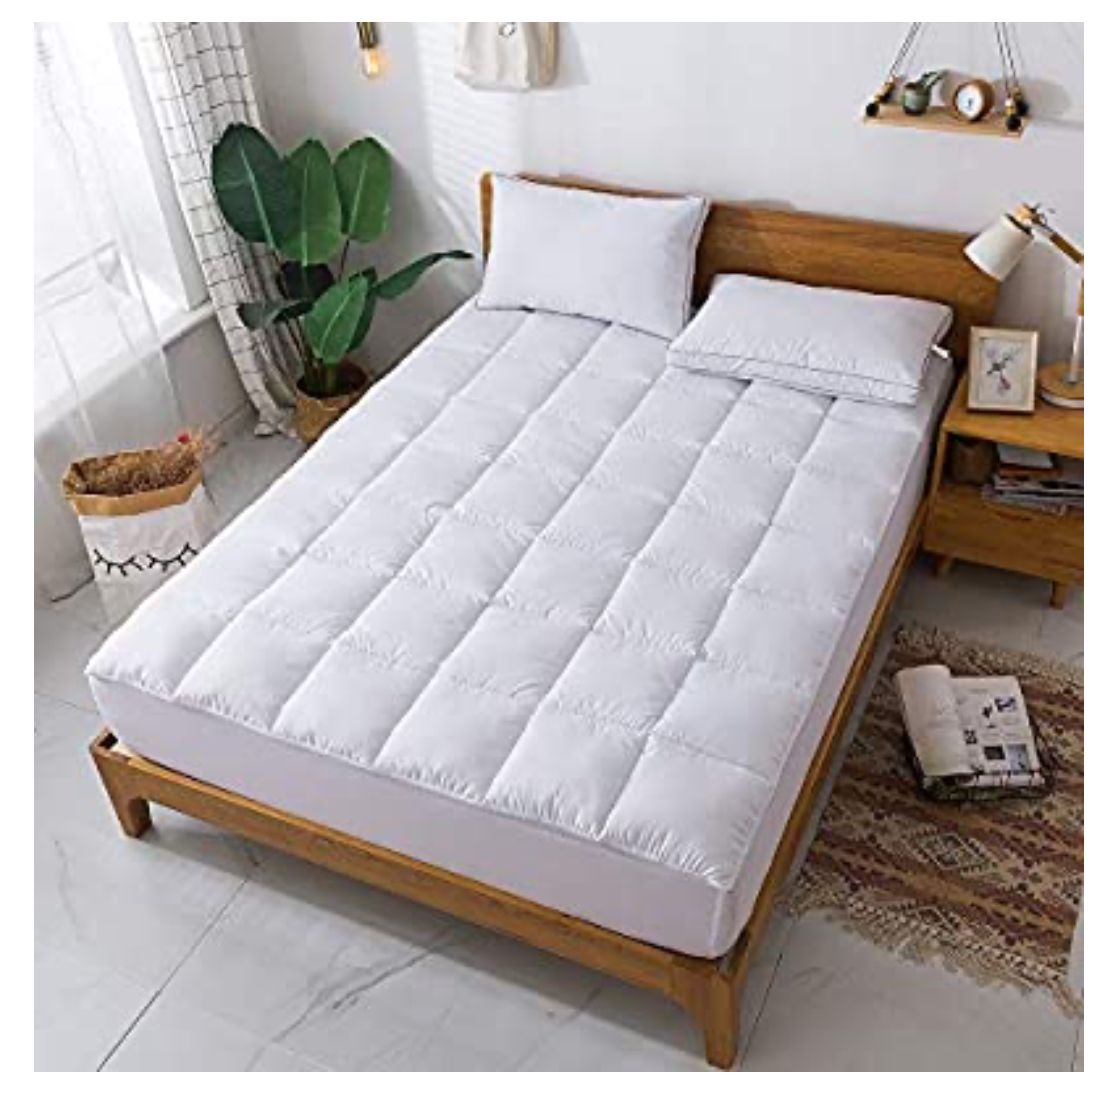 Whatbedding Fitted Mattress Pad from Amazon